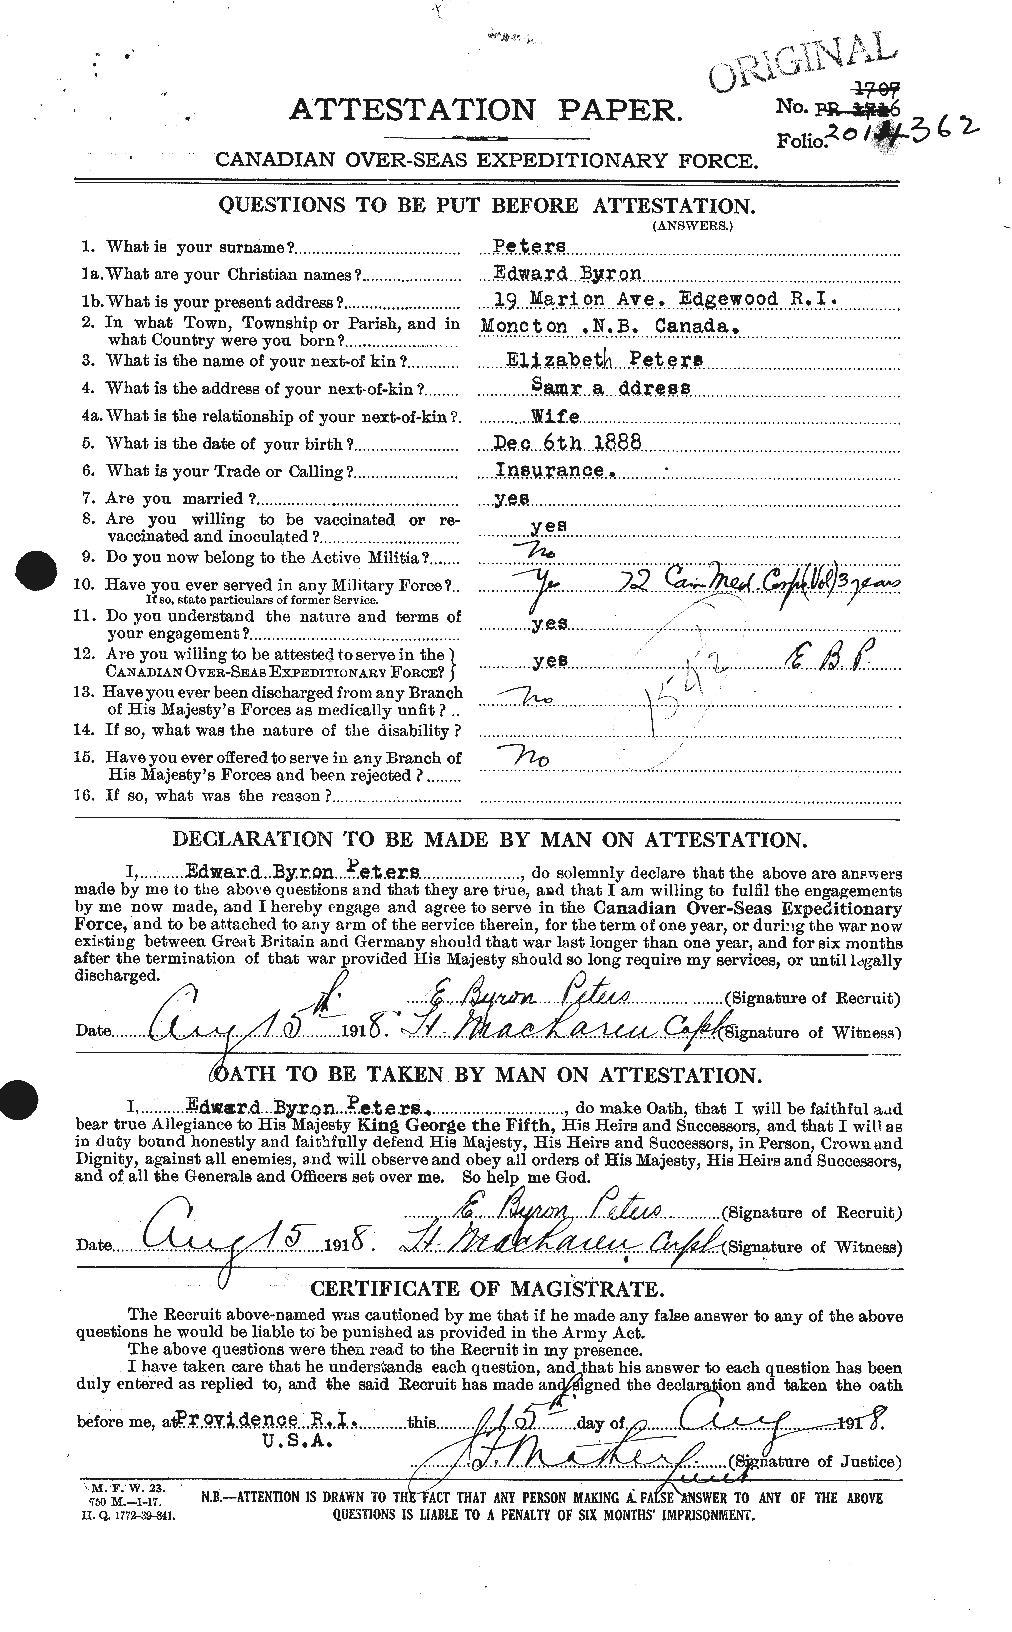 Personnel Records of the First World War - CEF 575405a